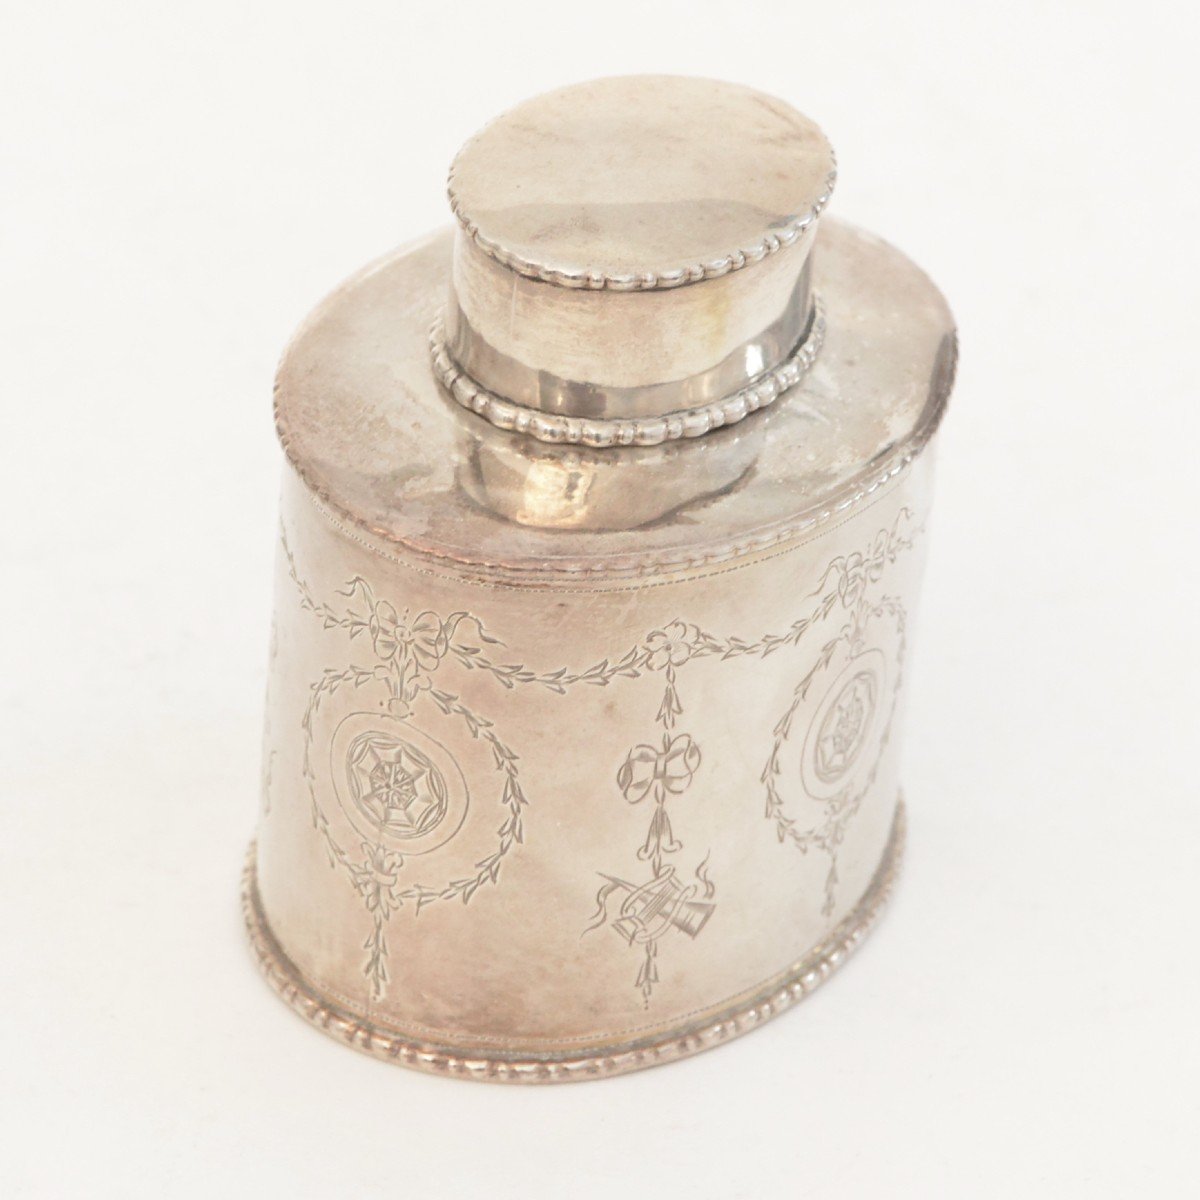 Miniature Tea Caddy Anglais En Argent Massif George Nathan Et Ridley Hayes Chester 1909-photo-1